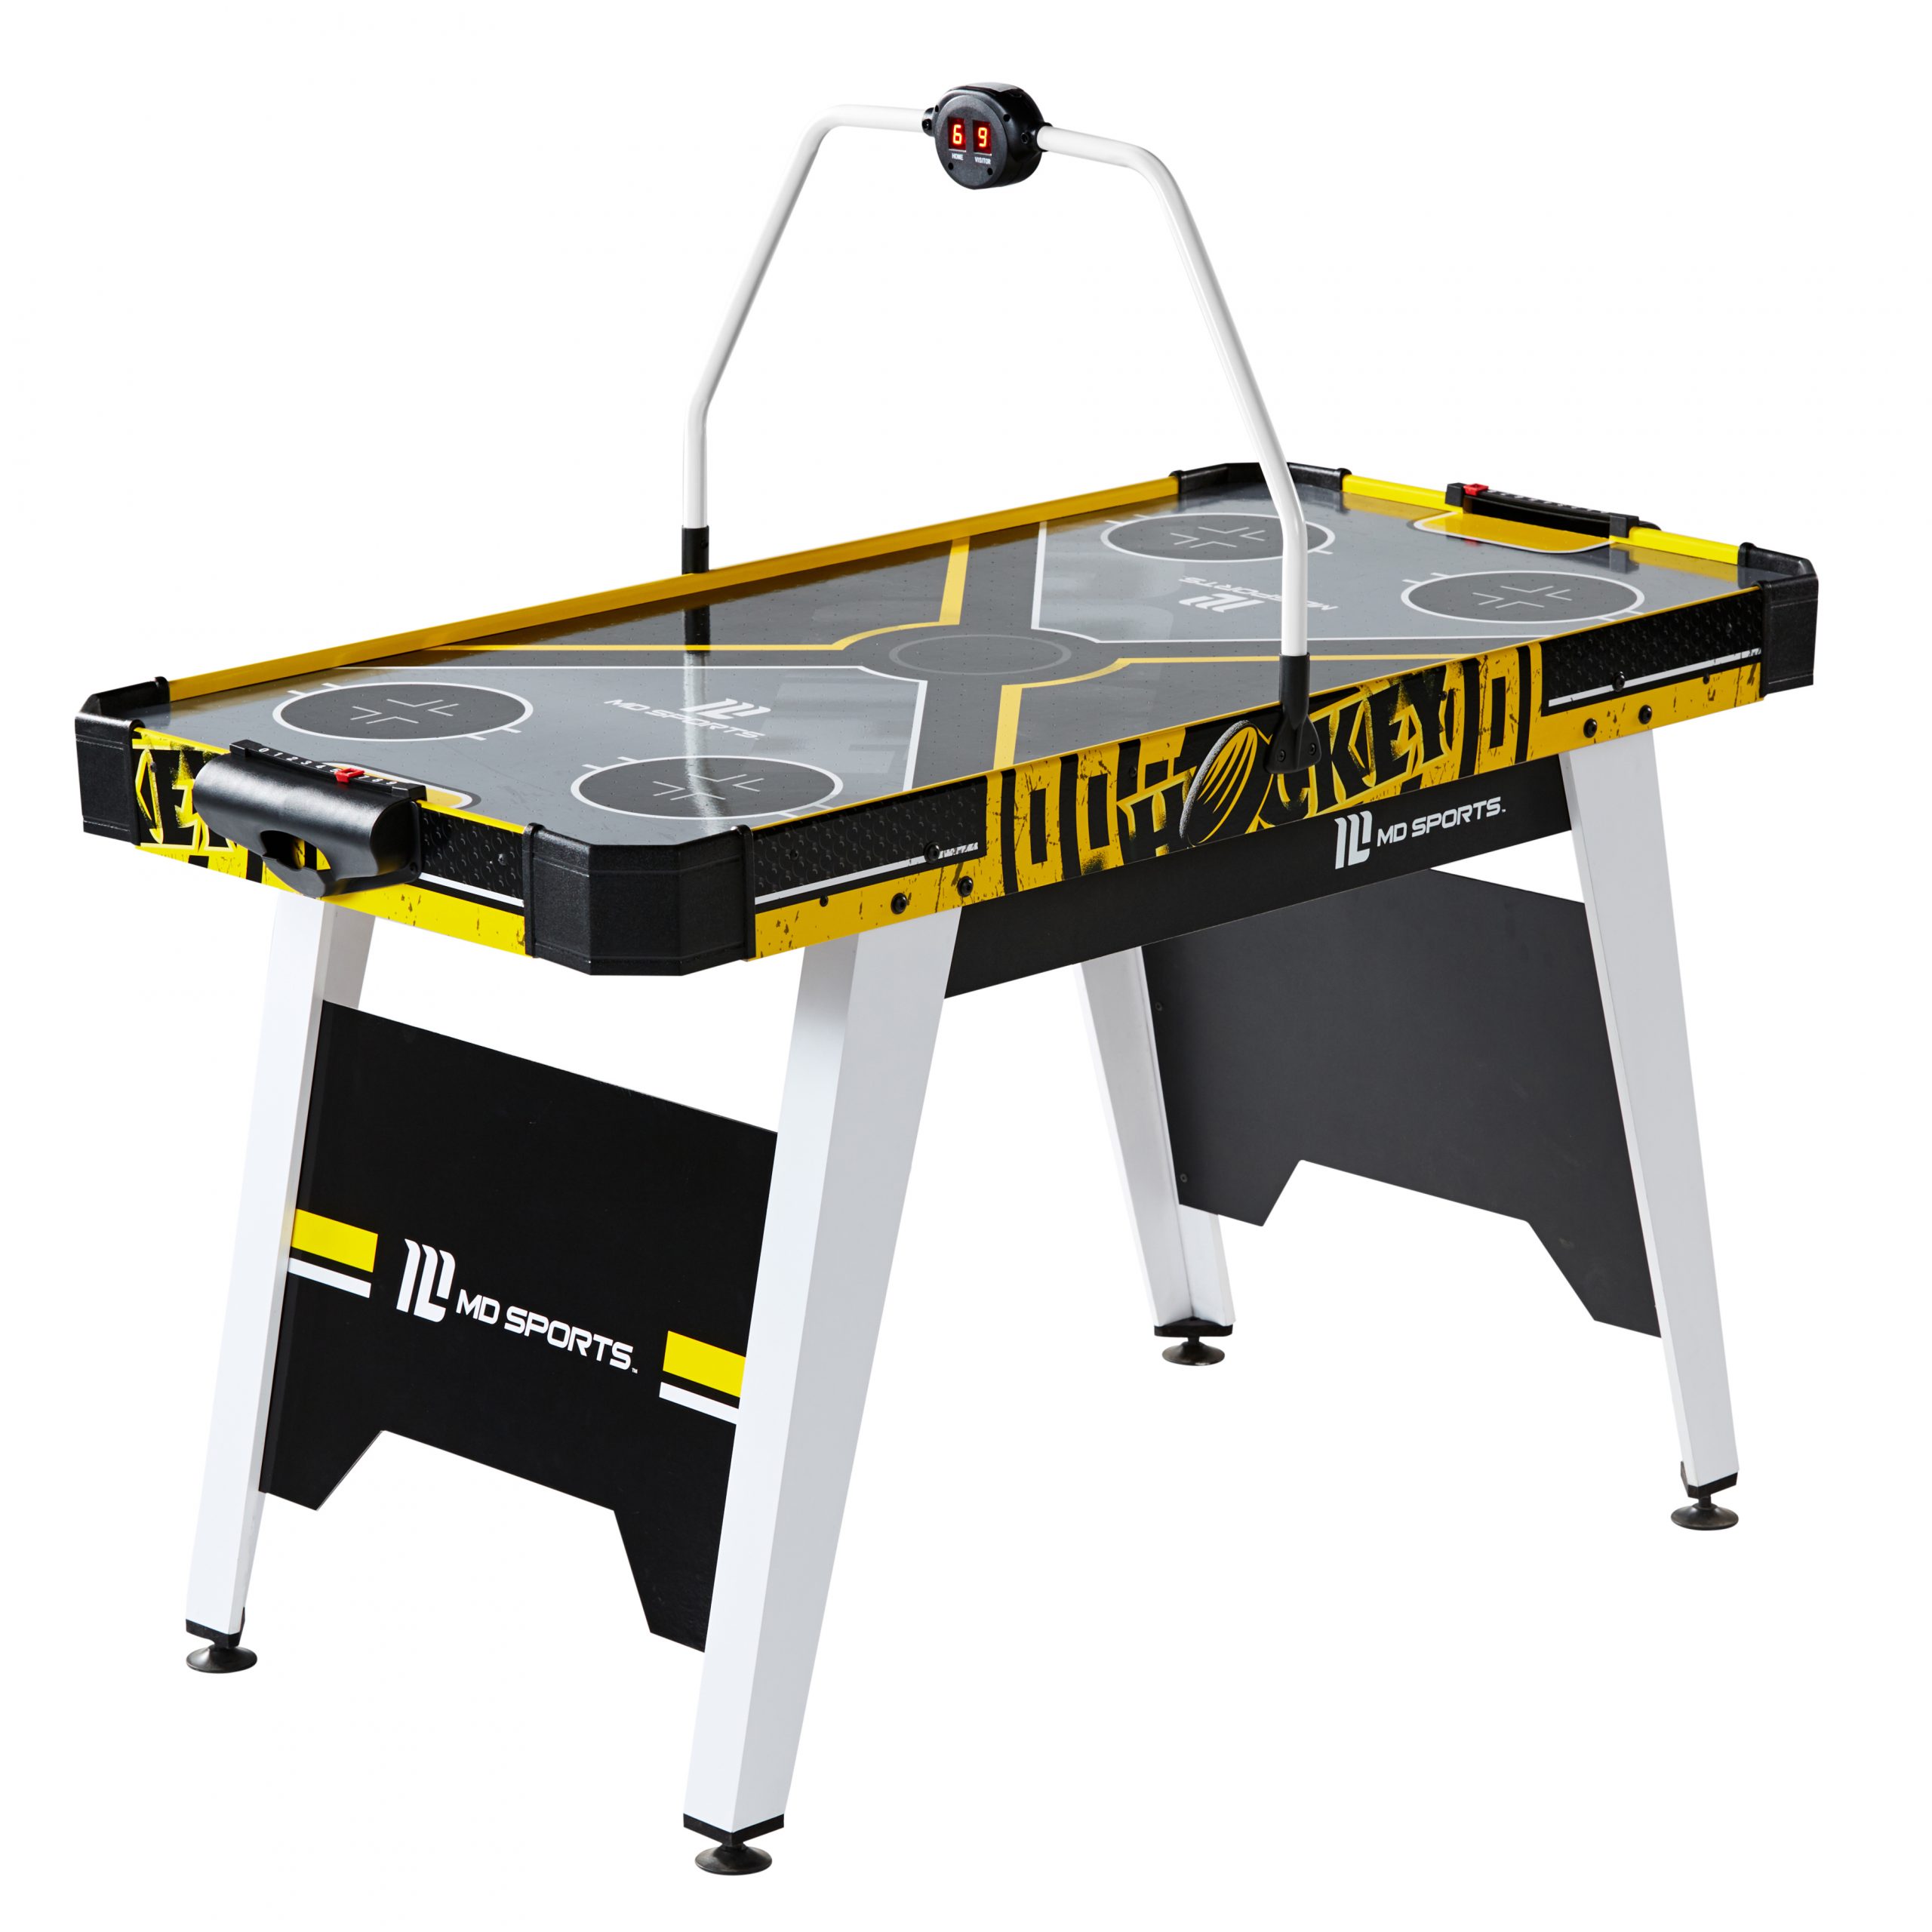 Black and yellow MD Sports 54-Inch Air Hockey Game Table